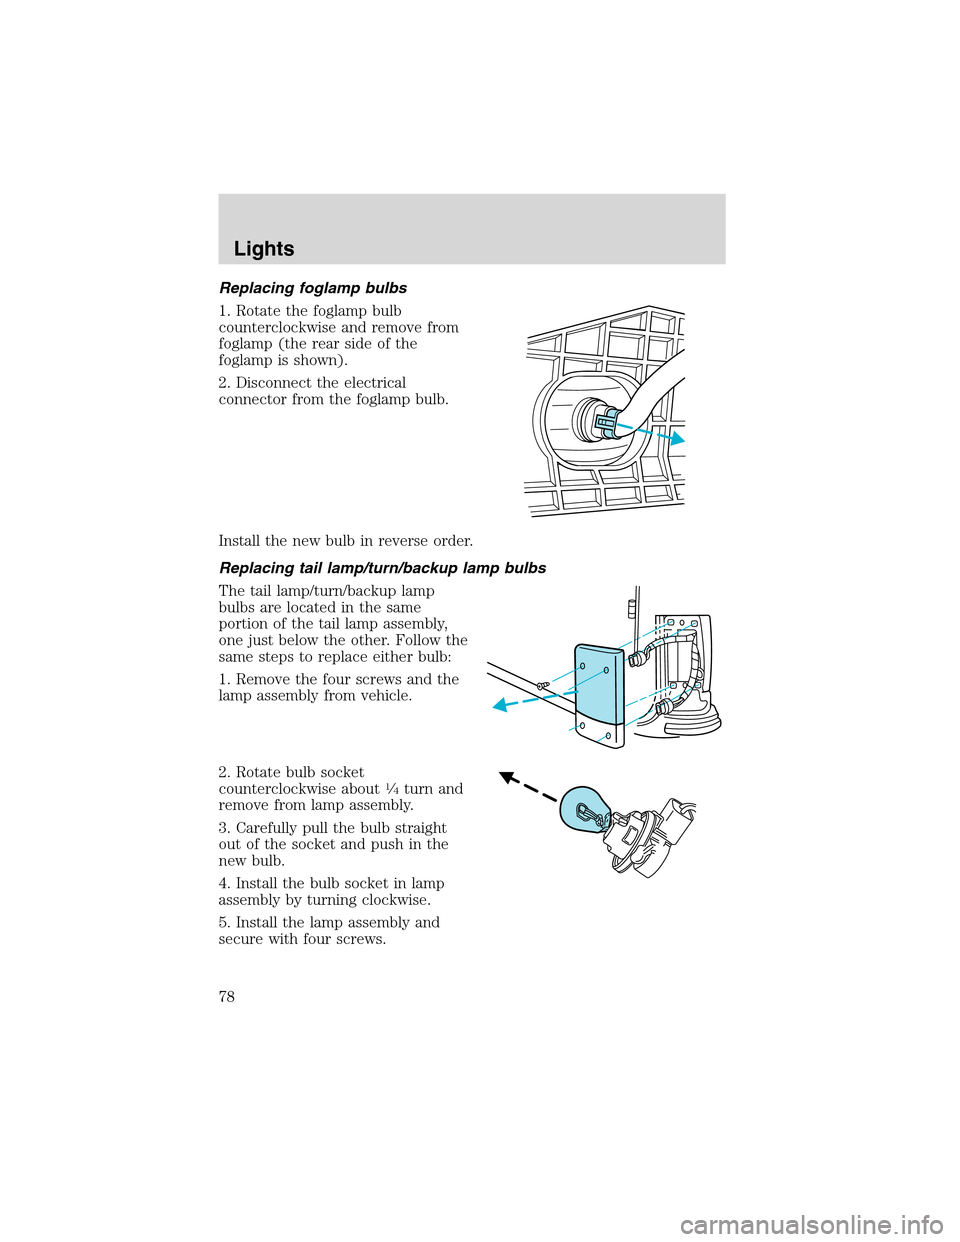 FORD EXCURSION 2004 1.G Manual PDF Replacing foglamp bulbs
1. Rotate the foglamp bulb
counterclockwise and remove from
foglamp (the rear side of the
foglamp is shown).
2. Disconnect the electrical
connector from the foglamp bulb.
Insta